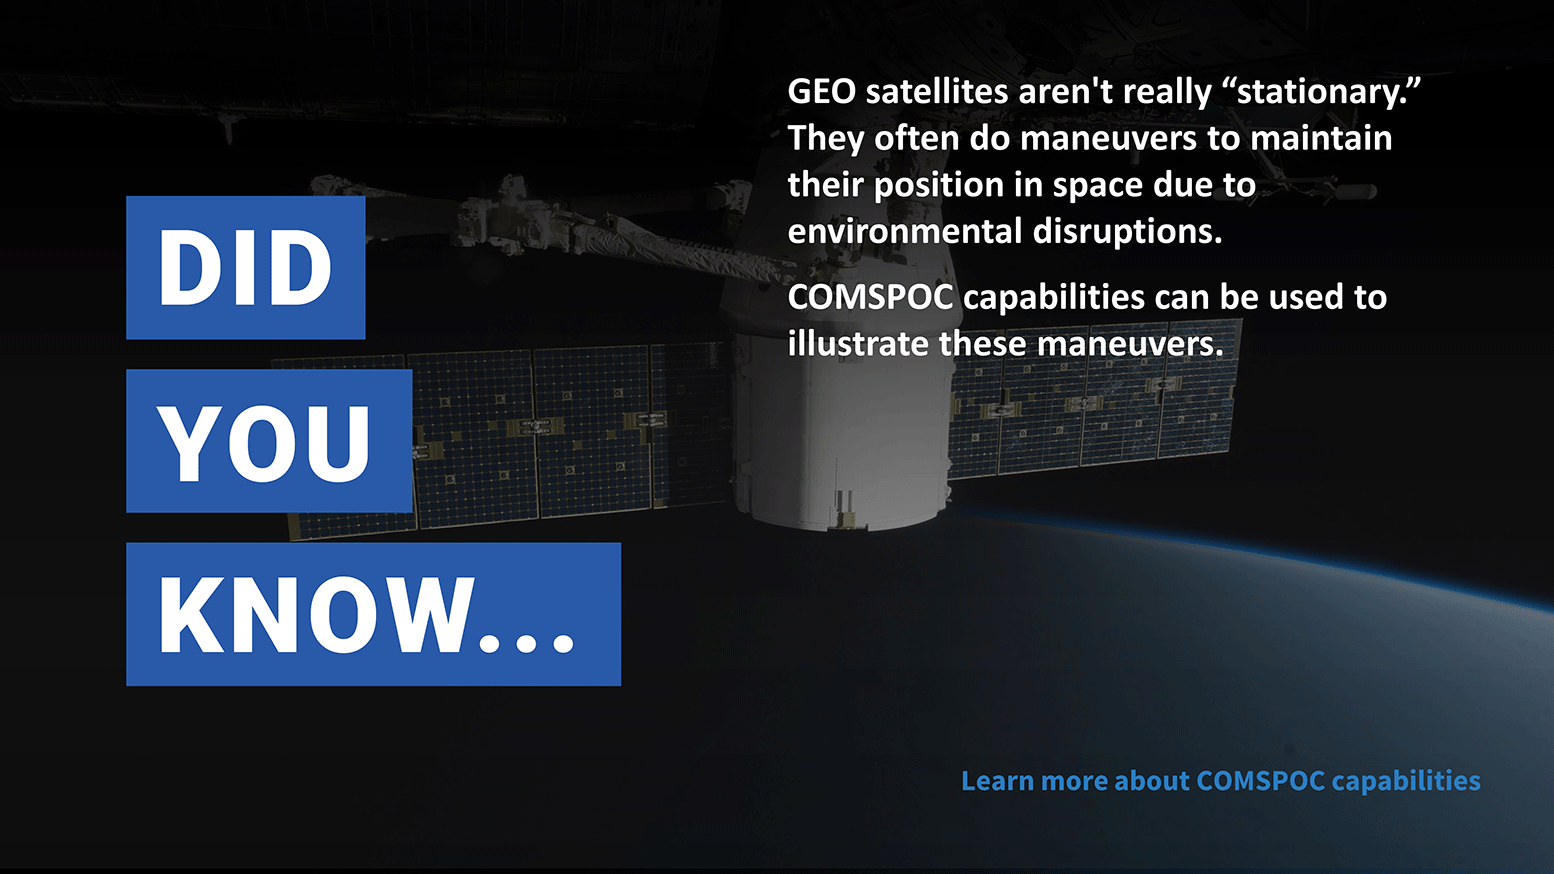 Did You Know: GEO satellites aren't really stationary.